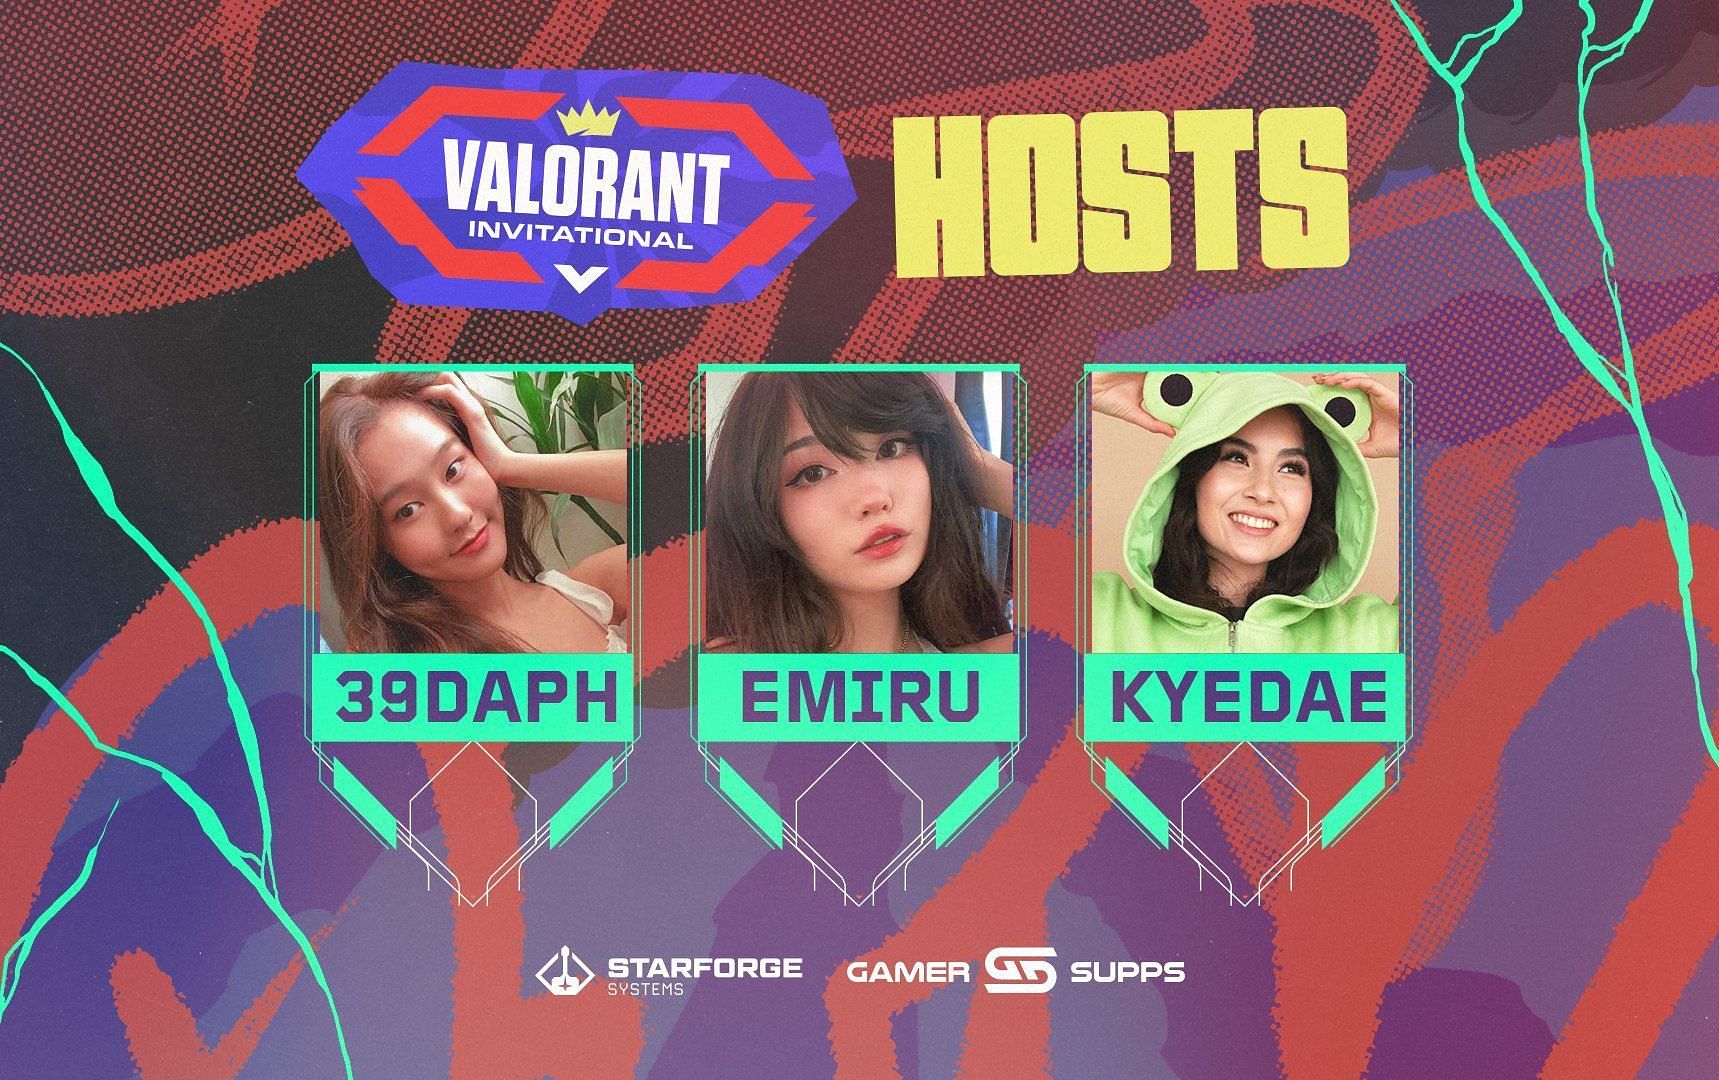 Twitch streamers 39daph, Emiru, and Kyedae will be hosting the Valorant Invitational (Image via X)